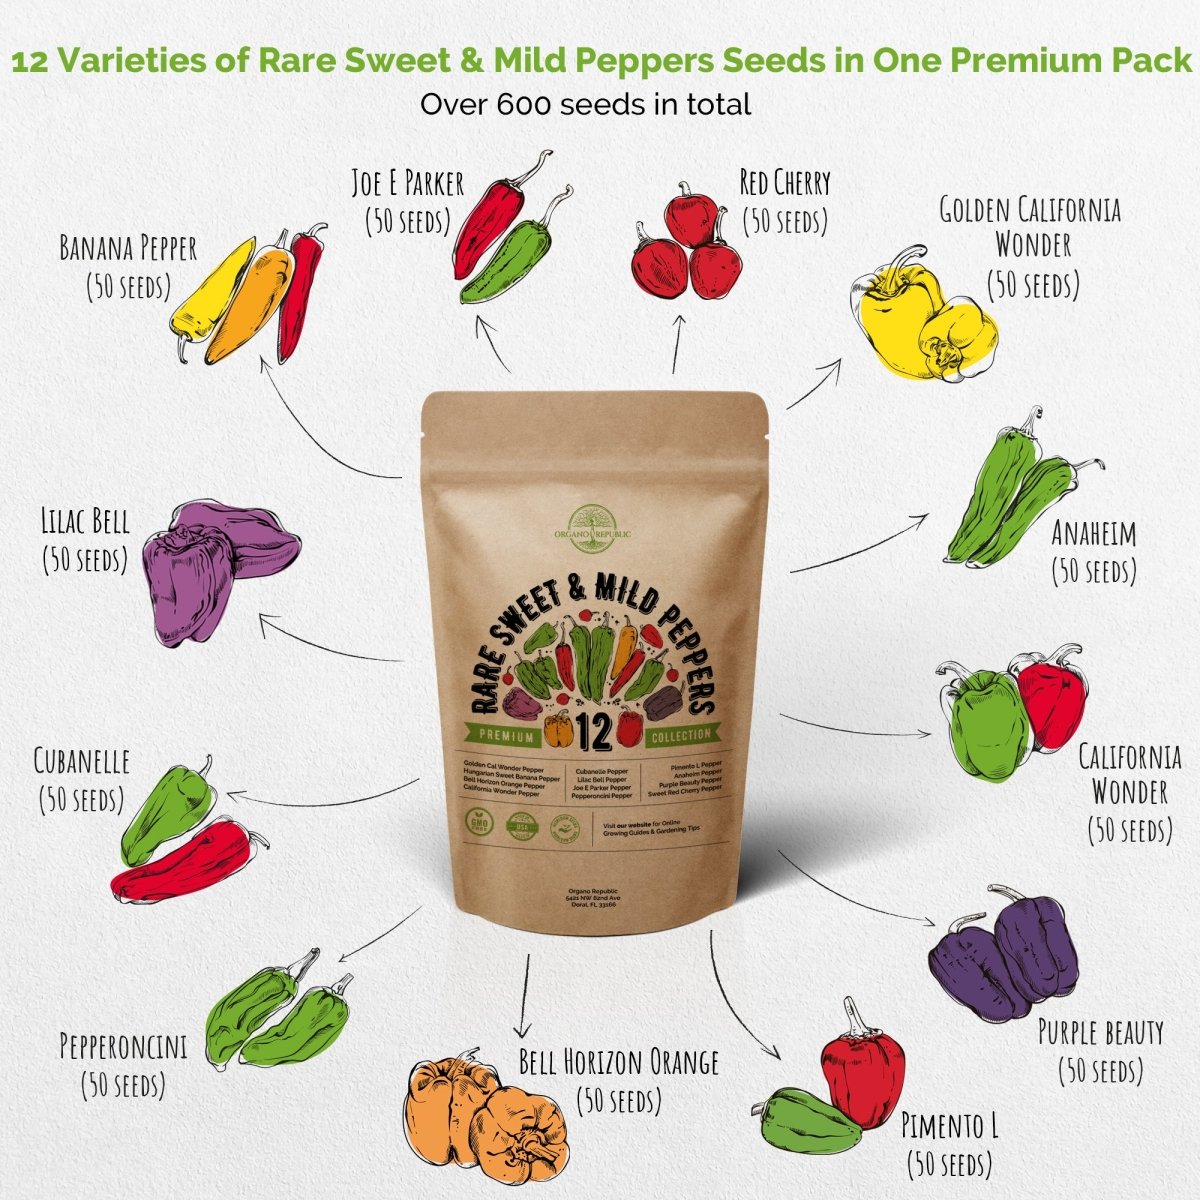 12 Rare Sweet & Mild Peppers Seeds Variety Pack - Over 600 Non-GMO, Heirloom Seeds - Organo Republic